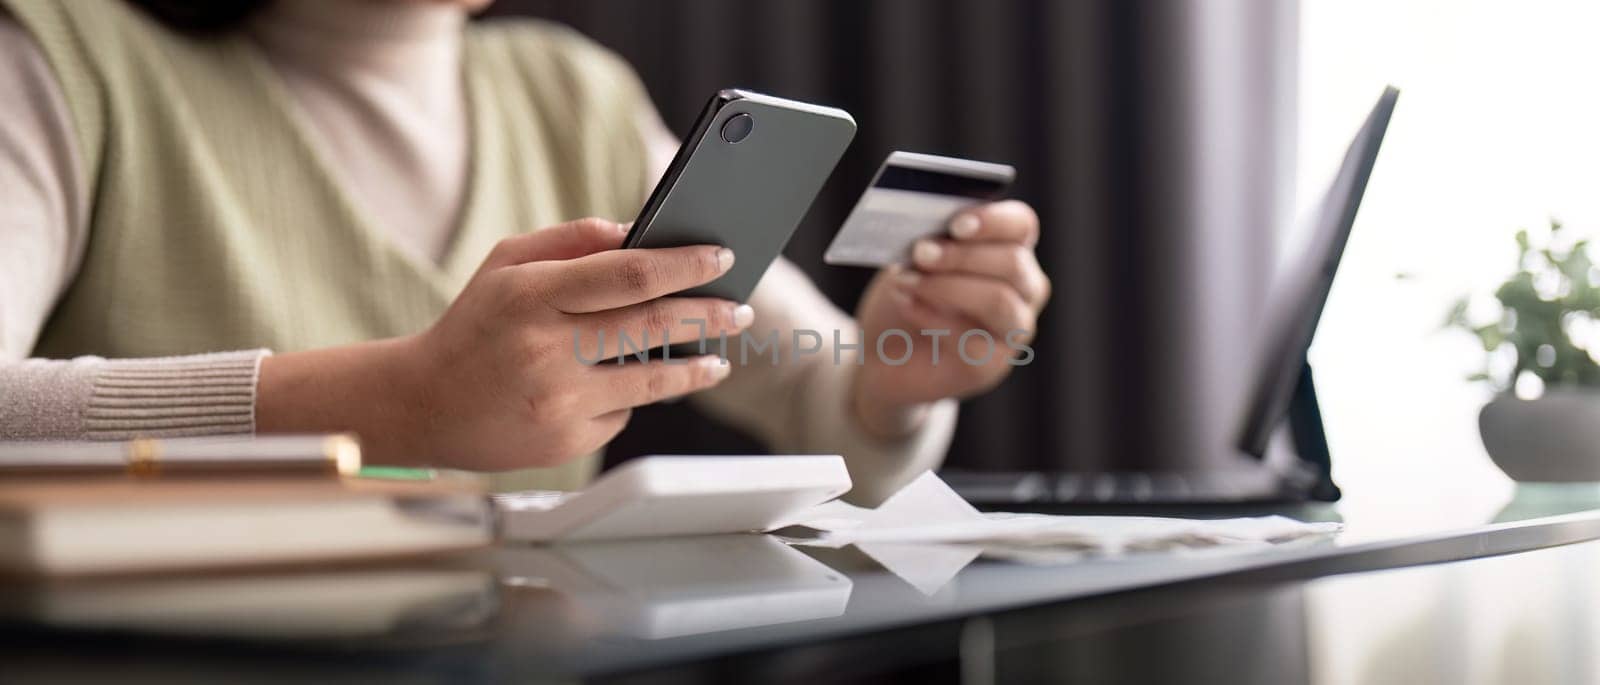 Young woman holding mobile phone and credit card sitting at the table. Happy woman makes online shopping using mobile payment. banking app service.